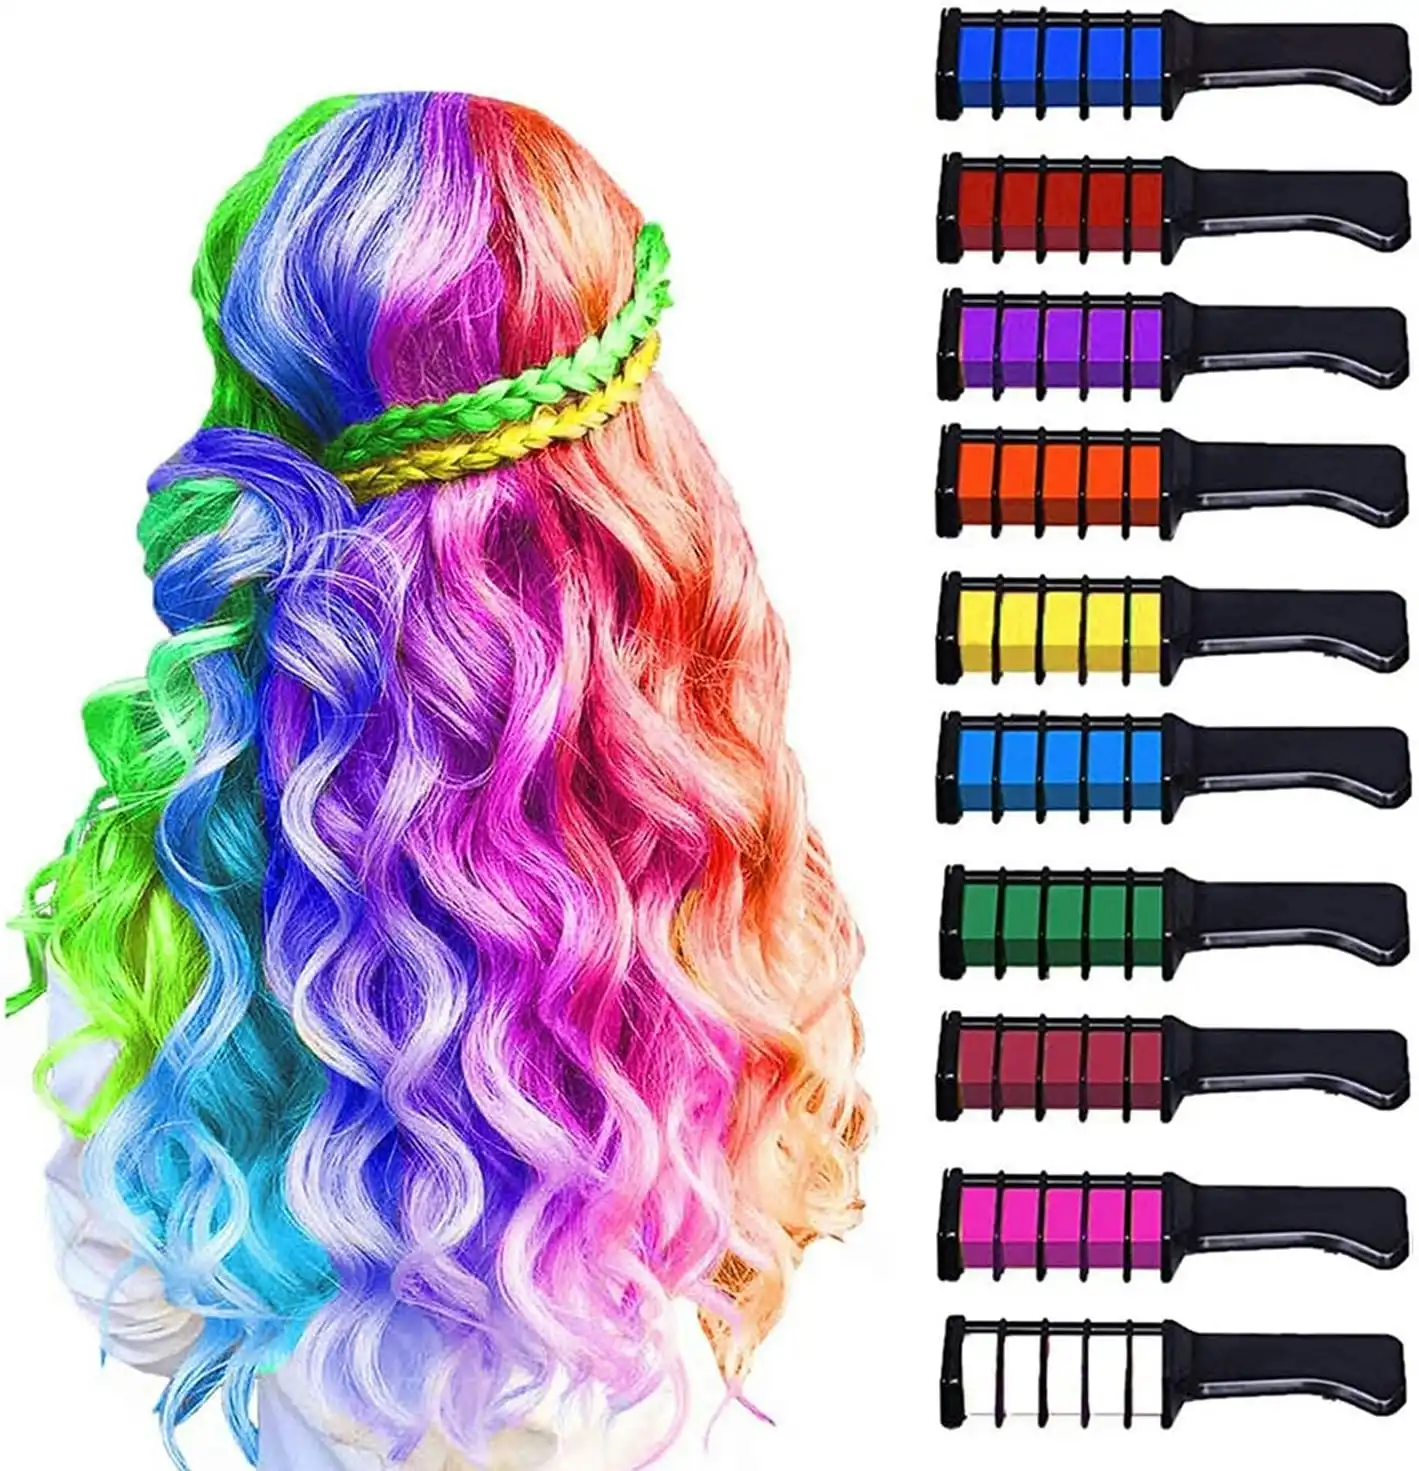 10 Color Hair Chalk for Kids, Temporary Hair Color Comb Set Birthday Gifts Children's Day DIY Party Favors